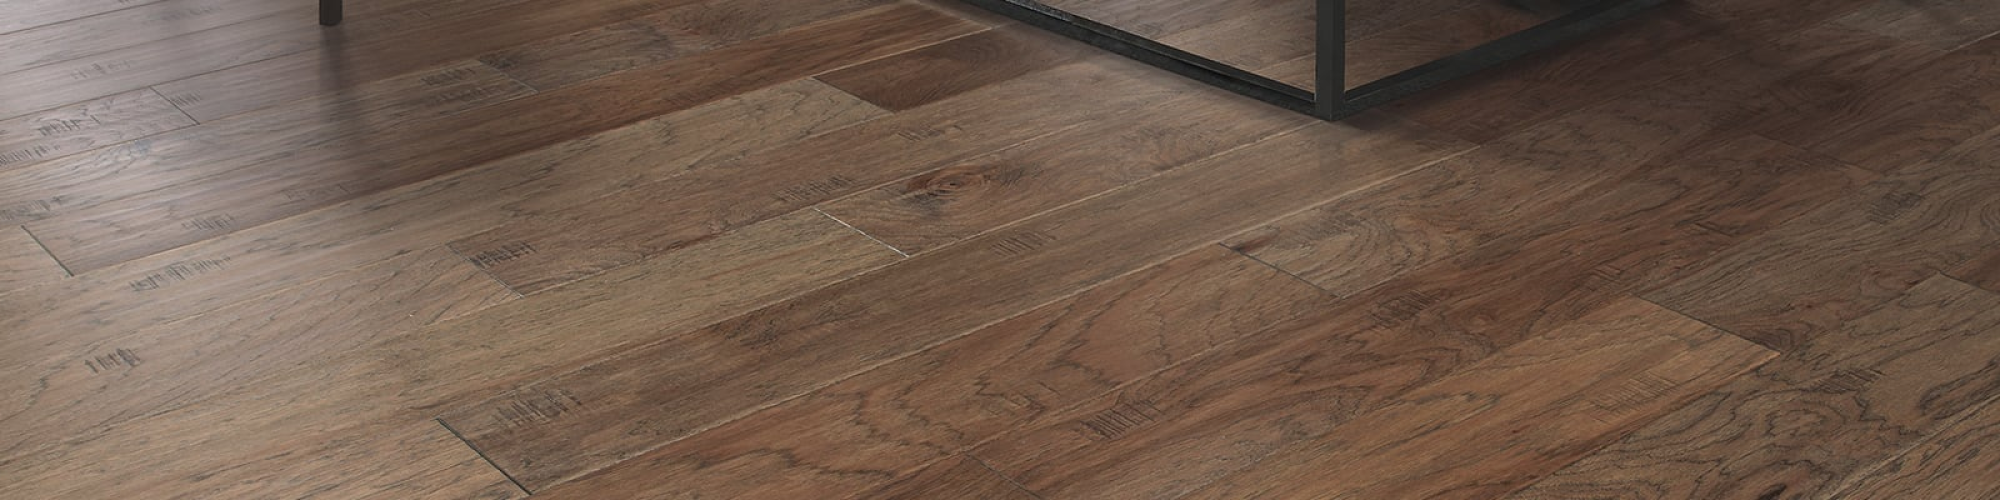 Convenient financing options available provided by Inserra's Flooring Outlet in Marcy, NY